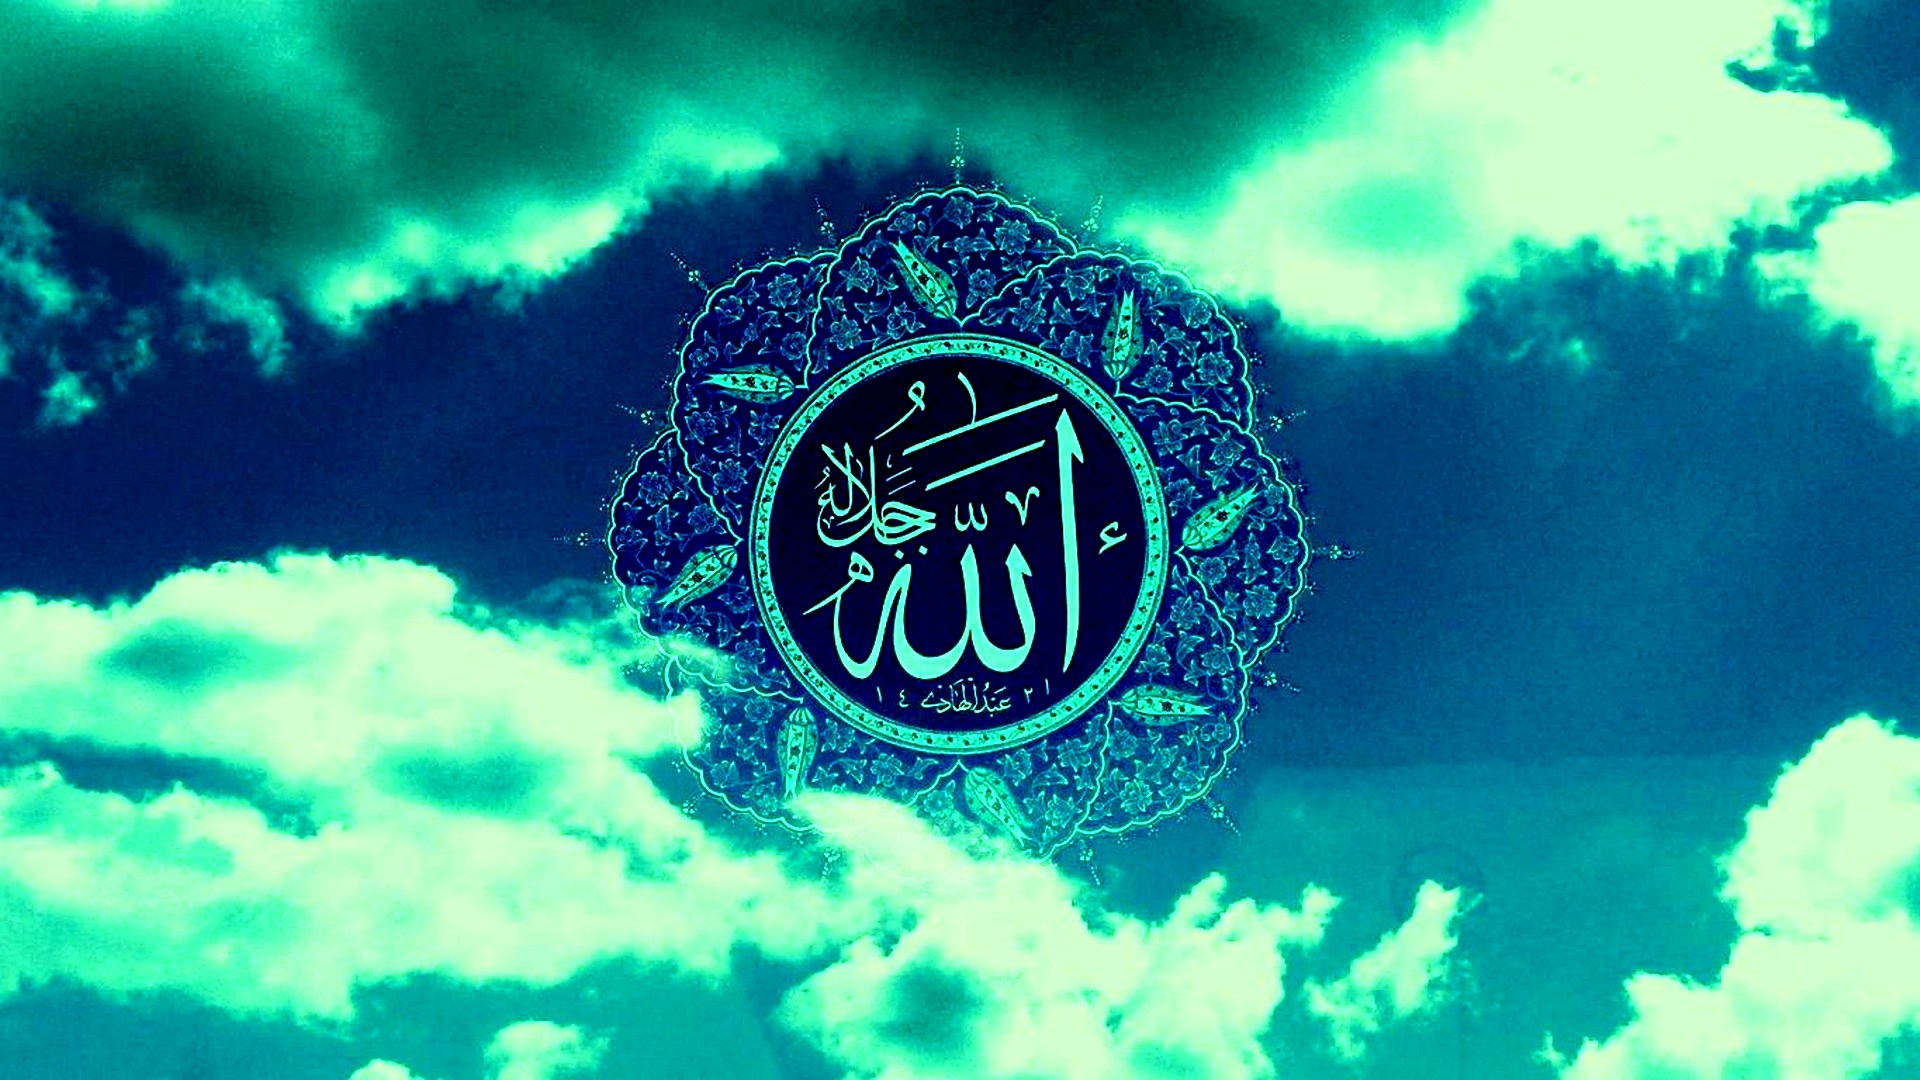 Beautiful Name Allah Mac Wallpaper with high-resolution 1920x1080 pixel. You can use and set as wallpaper for Notebook Screensavers, Mac Wallpapers, Mobile Home Screen, iPhone or Android Phones Lock Screen